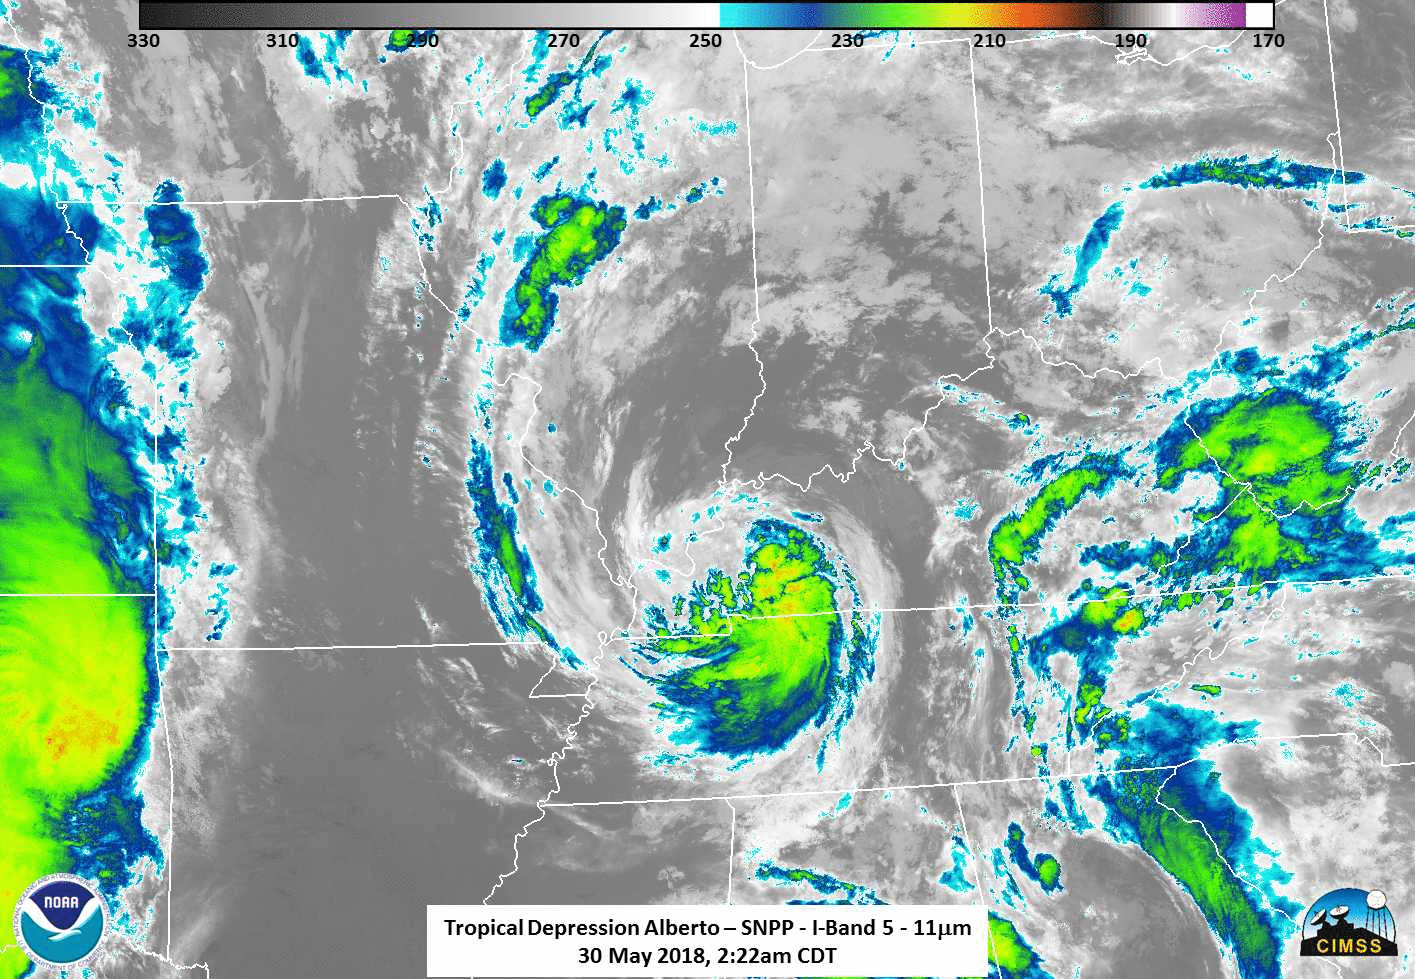 An animation flips between two infrared images of Tropical Depression Alberto over Tennessee and Kentucky. The majority of the image is in black and white, but the round-ish storm is in blue, green and yellow. The storm moves slightly northward in the second image.